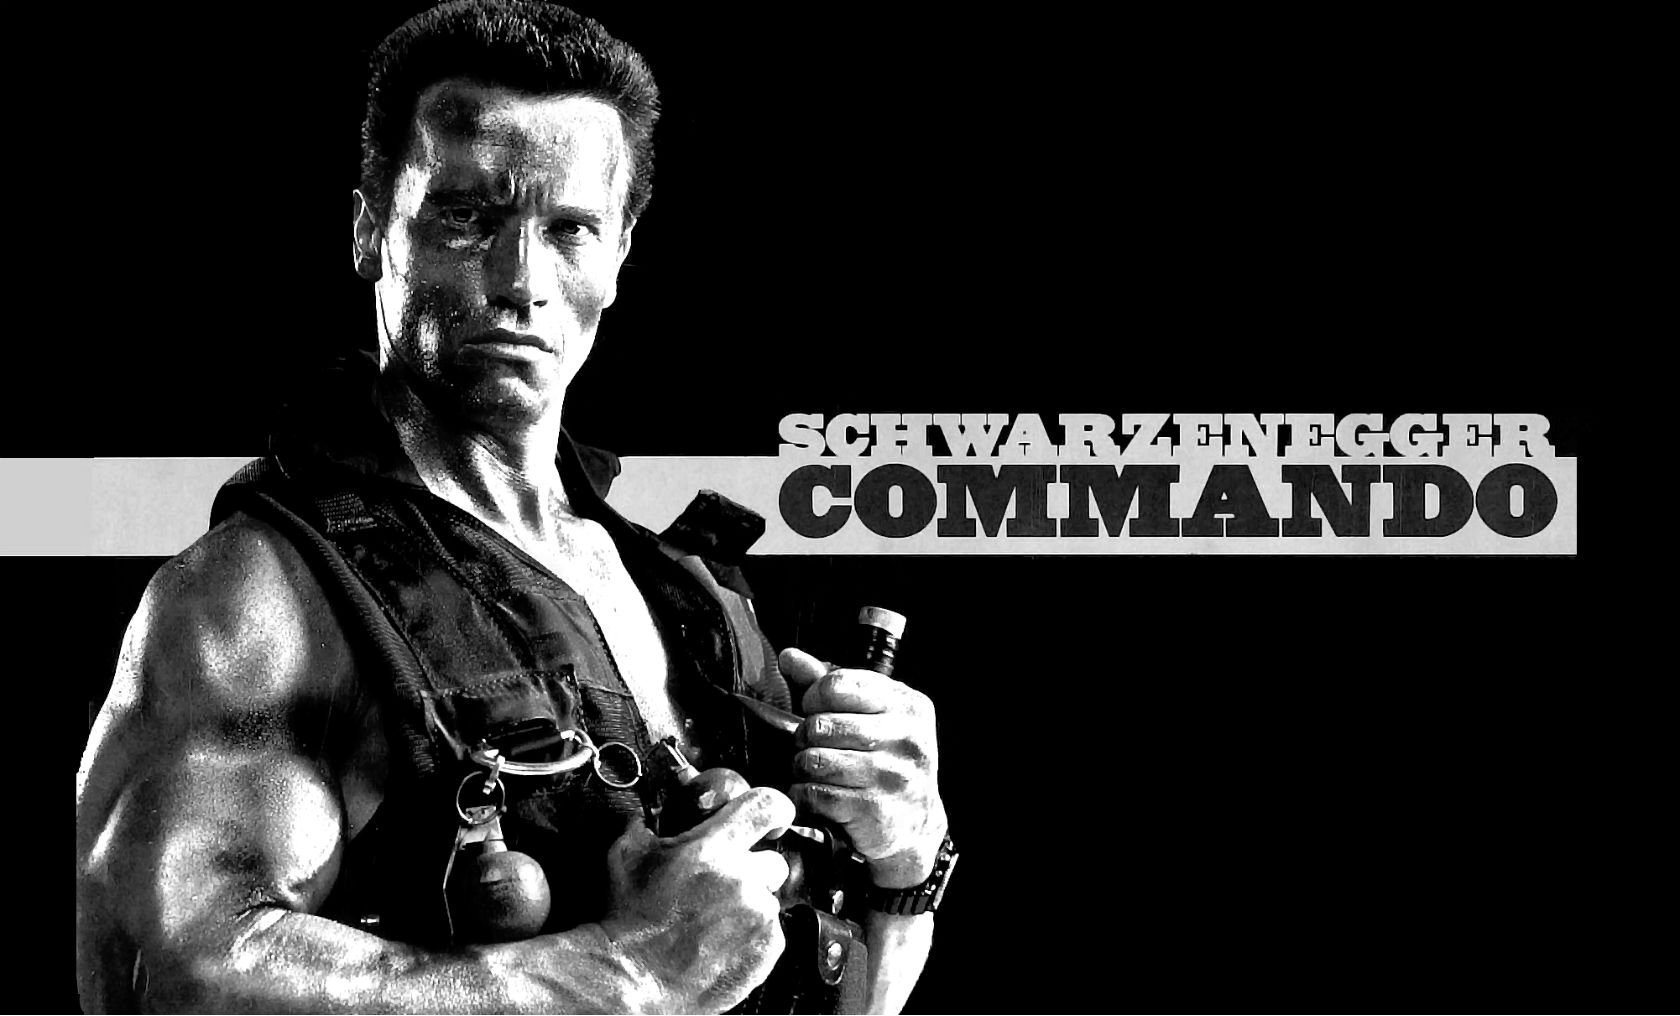 Download hd wallpapers of 1011803-commando, Movie, Action, Fighting, Milita...